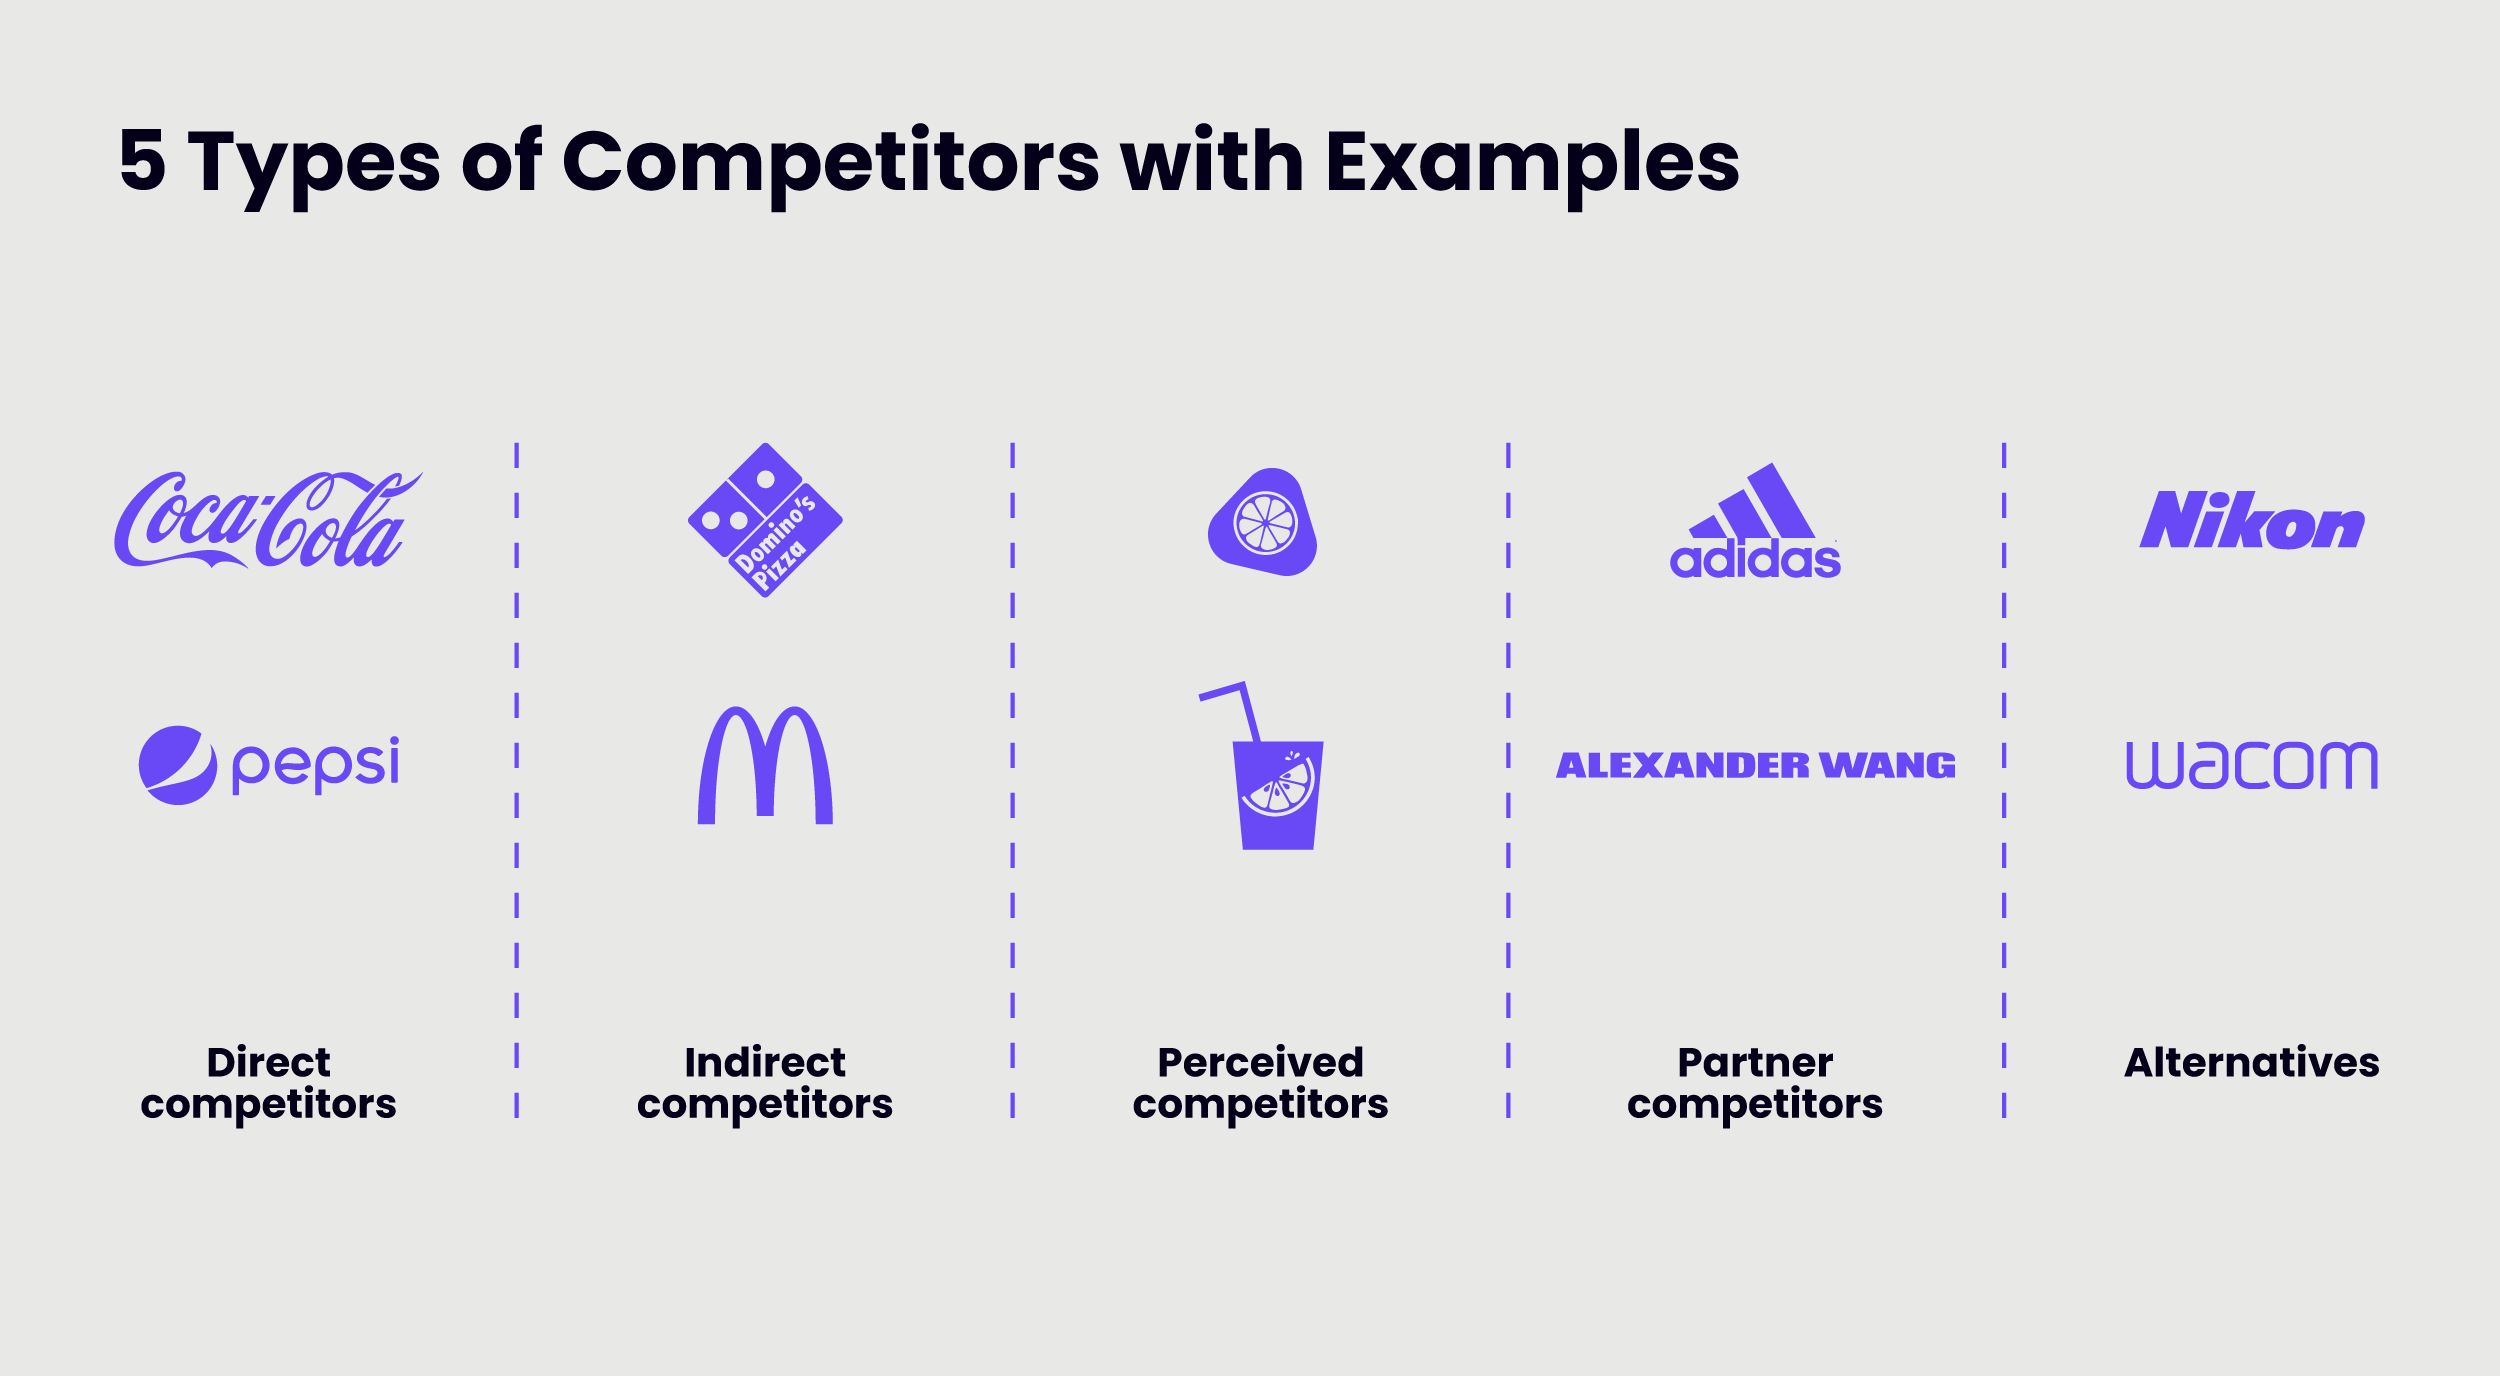 Image shows the five competitor categories: direct, indirect, perceived, partner, and alternatives.